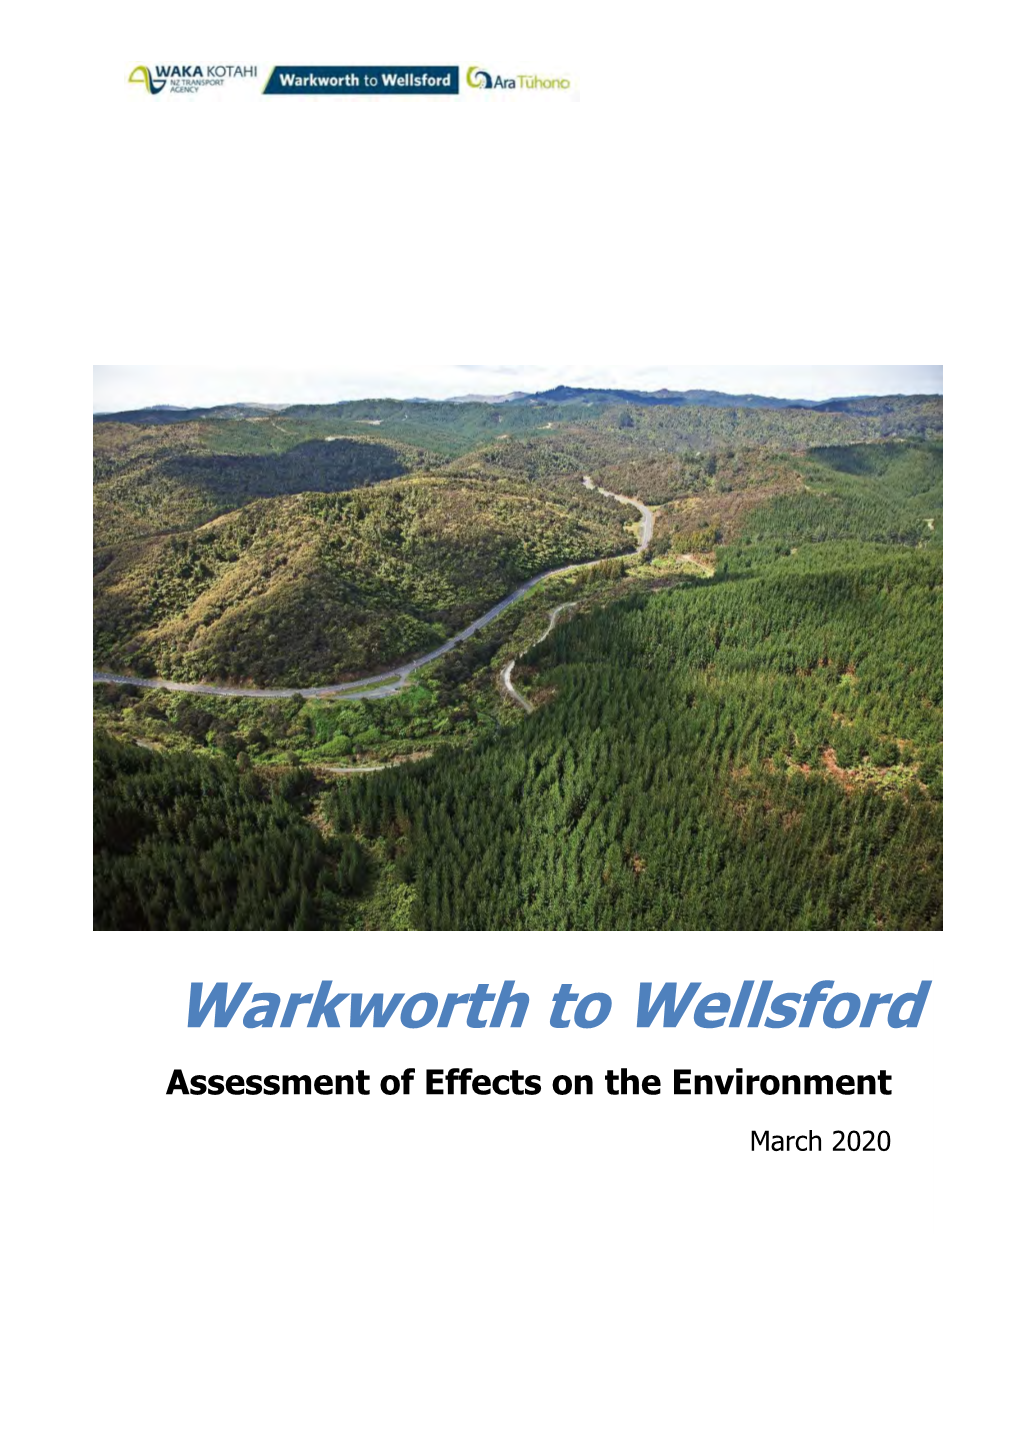 Warkworth to Wellsford Assessment of Effects on the Environment